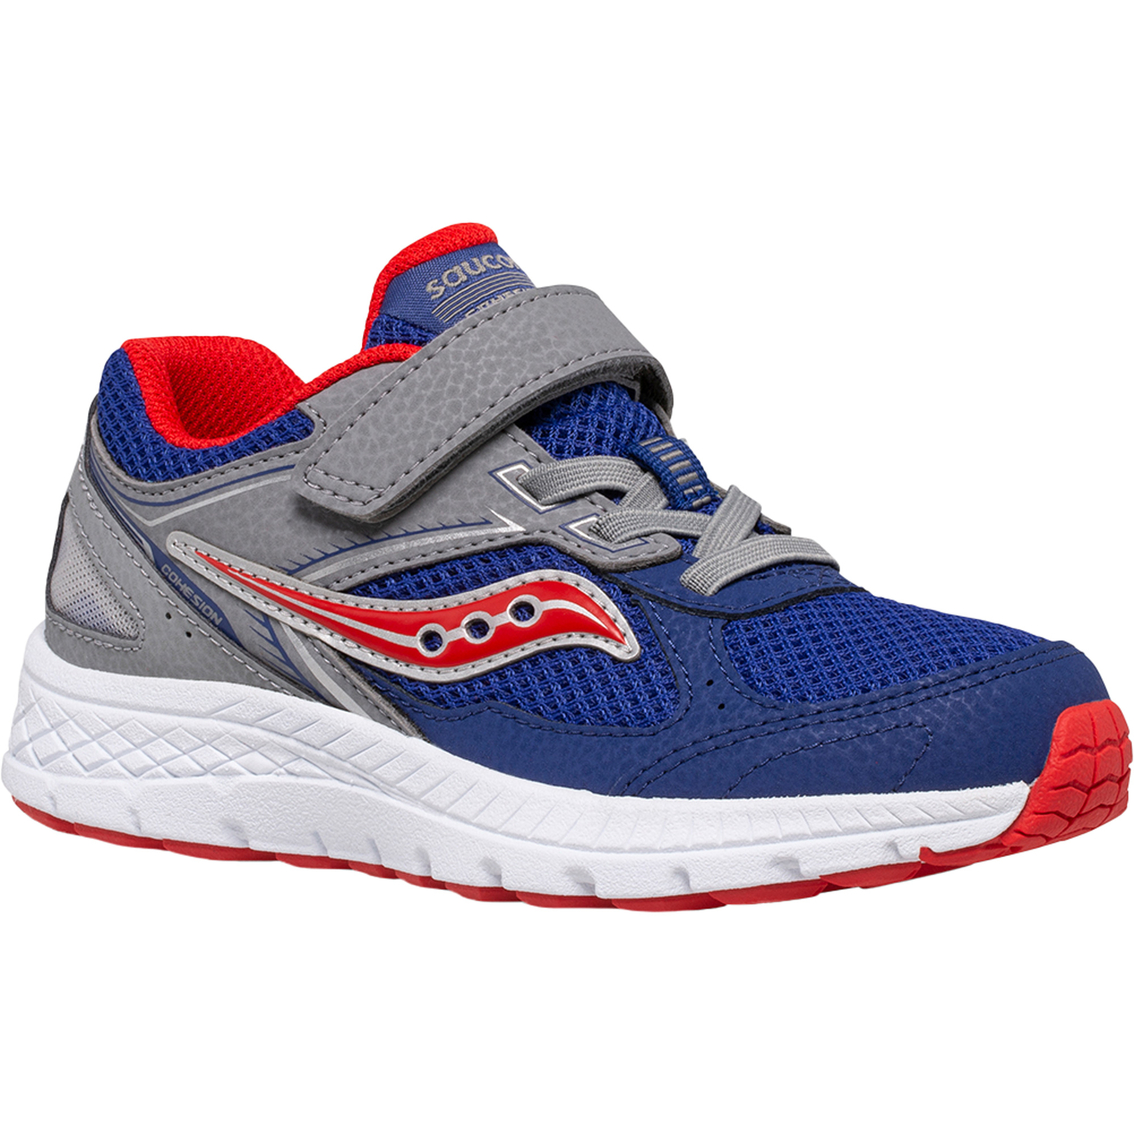 Saucony Preschool Boys Cohesion 14 A/c Sneakers | Sneakers | Shoes ...